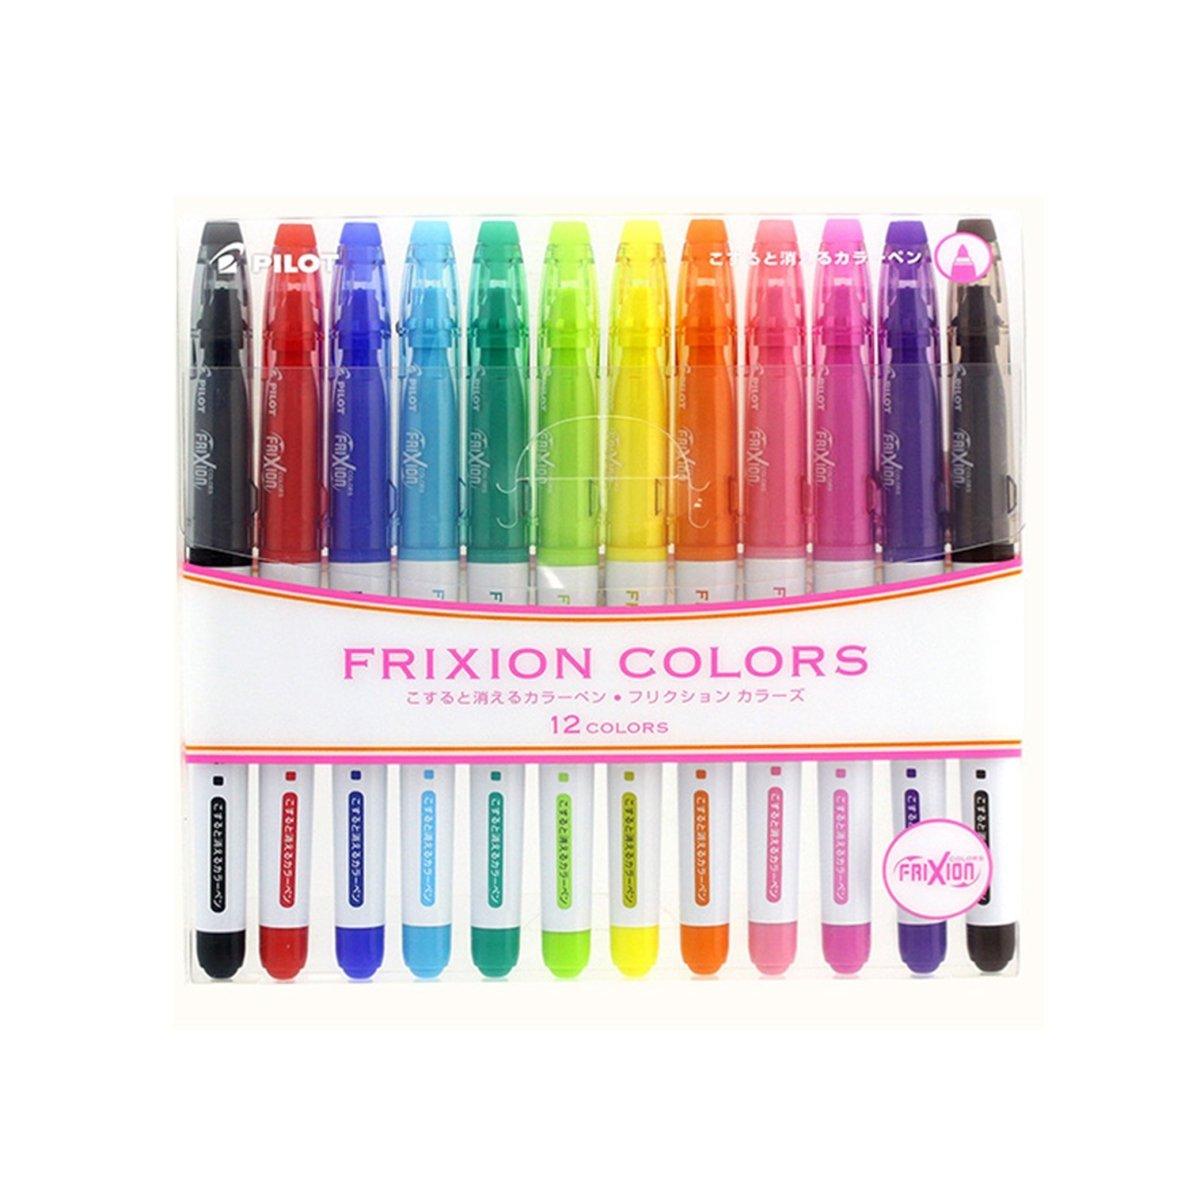 12-Color Magic Eraser Pen Set for Creative Note-Taking and